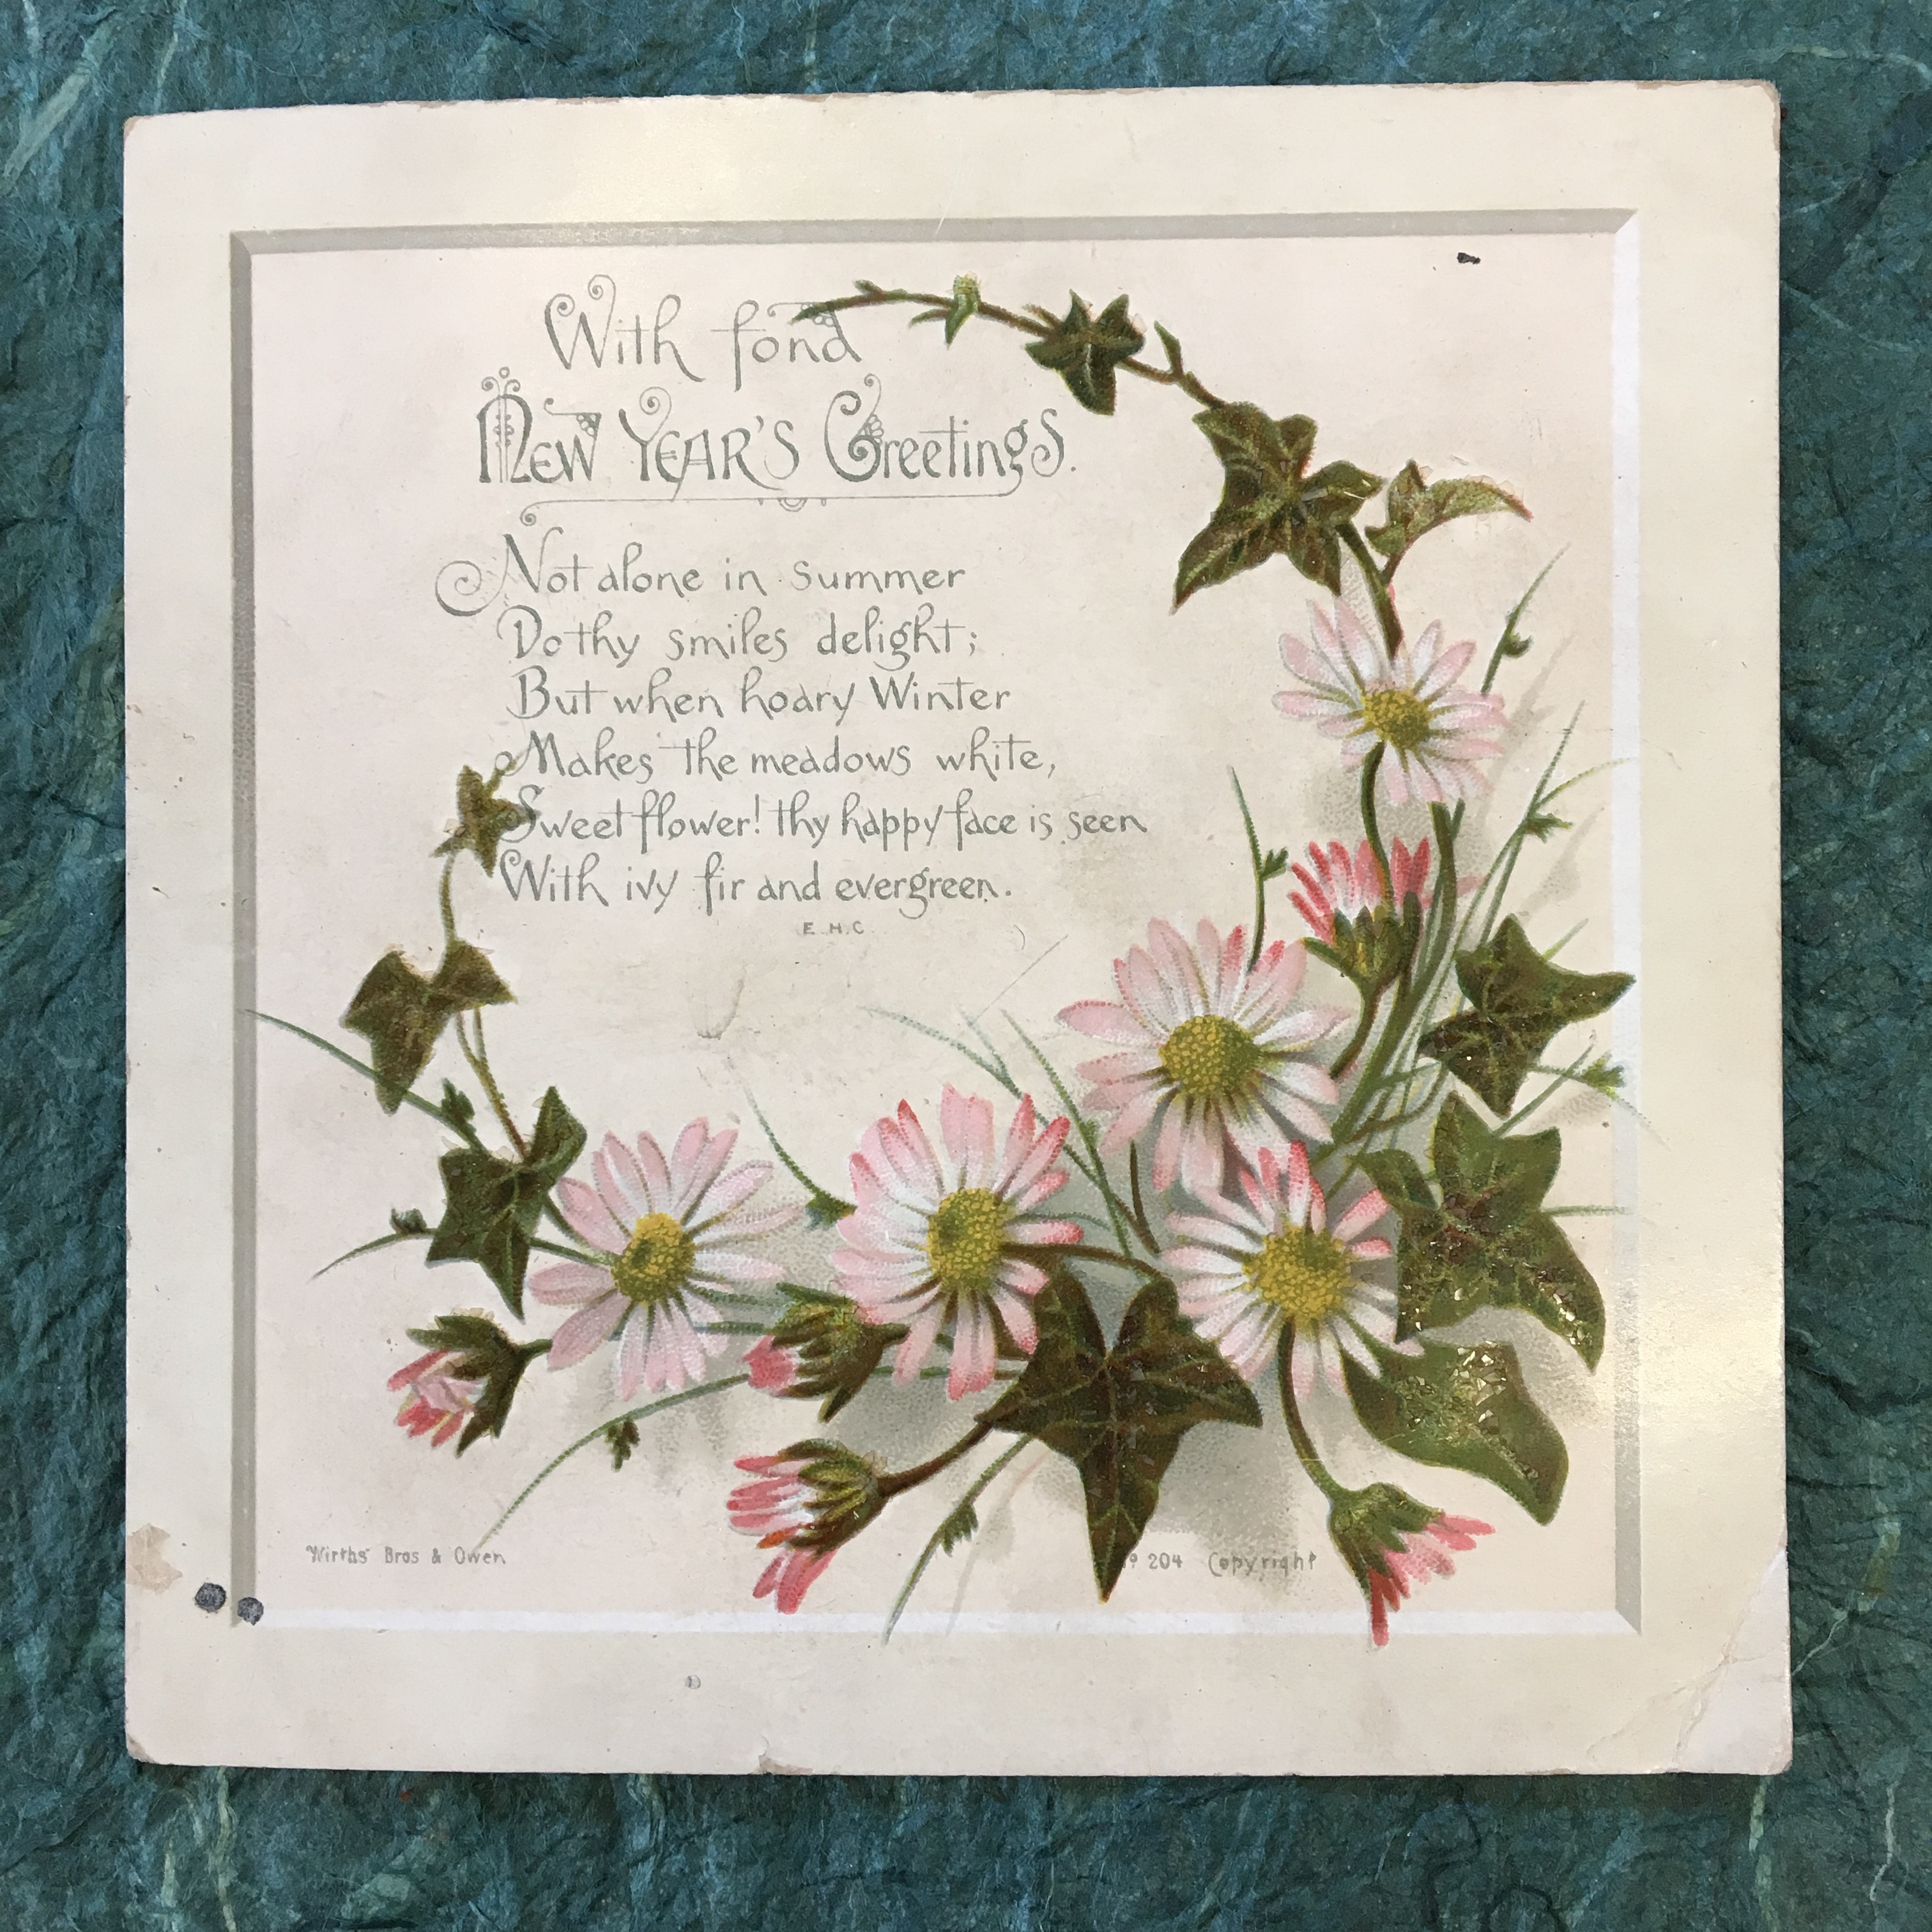 New Years card with a short poem and an illustration of some pink and white flowers